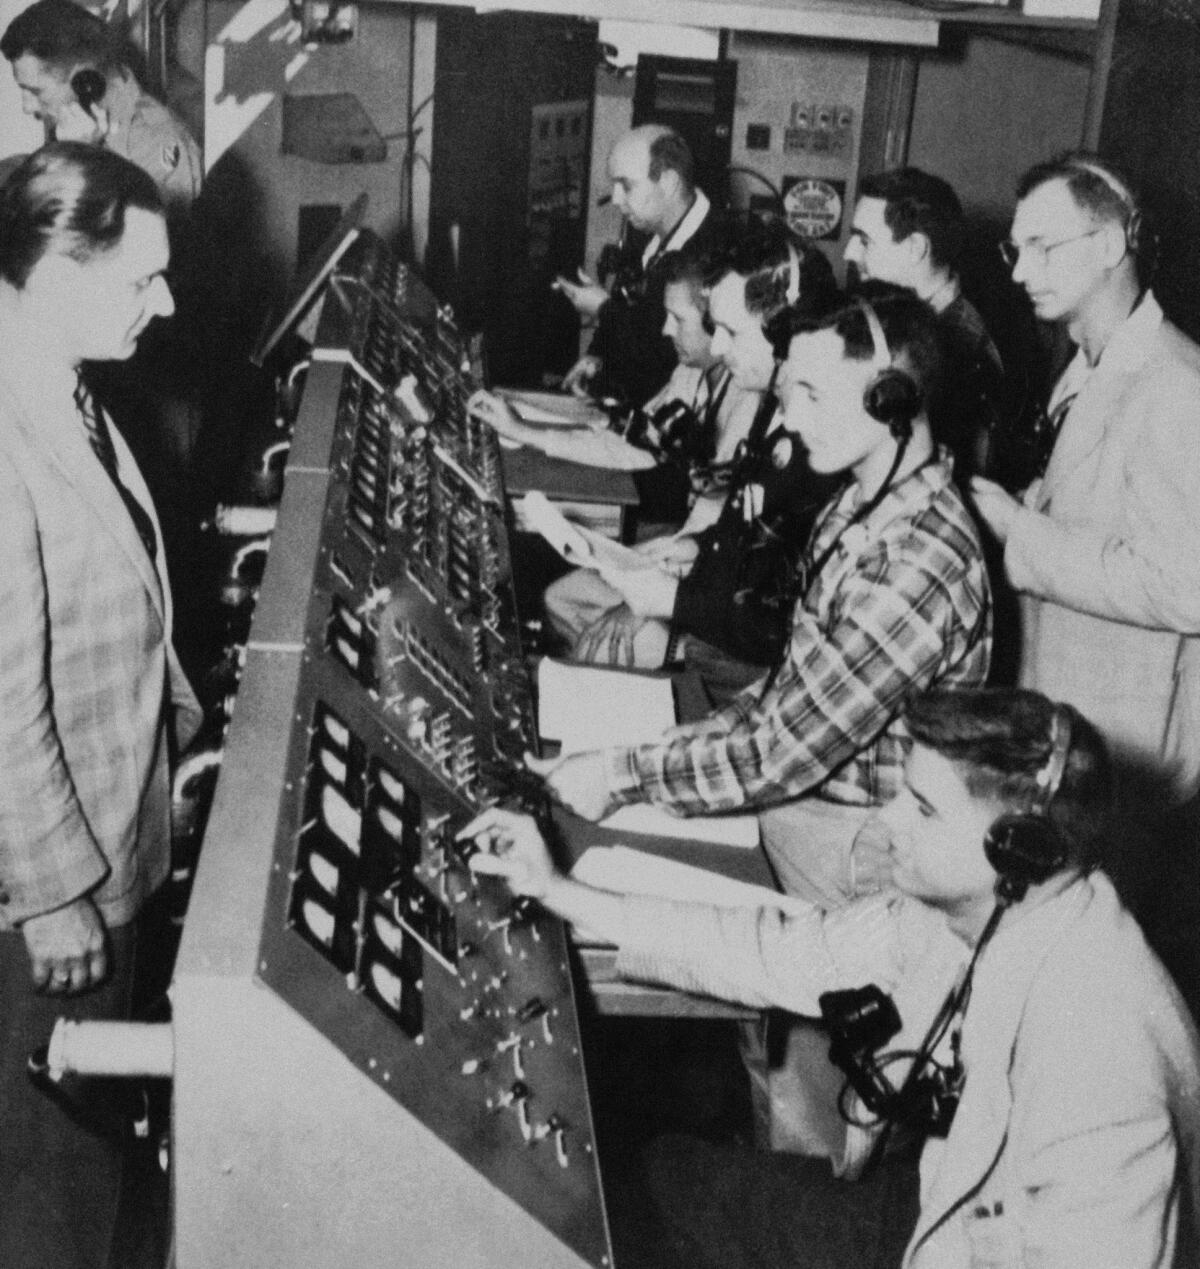 The Explorer 1 launch team works during countdown in Cape Canaveral.